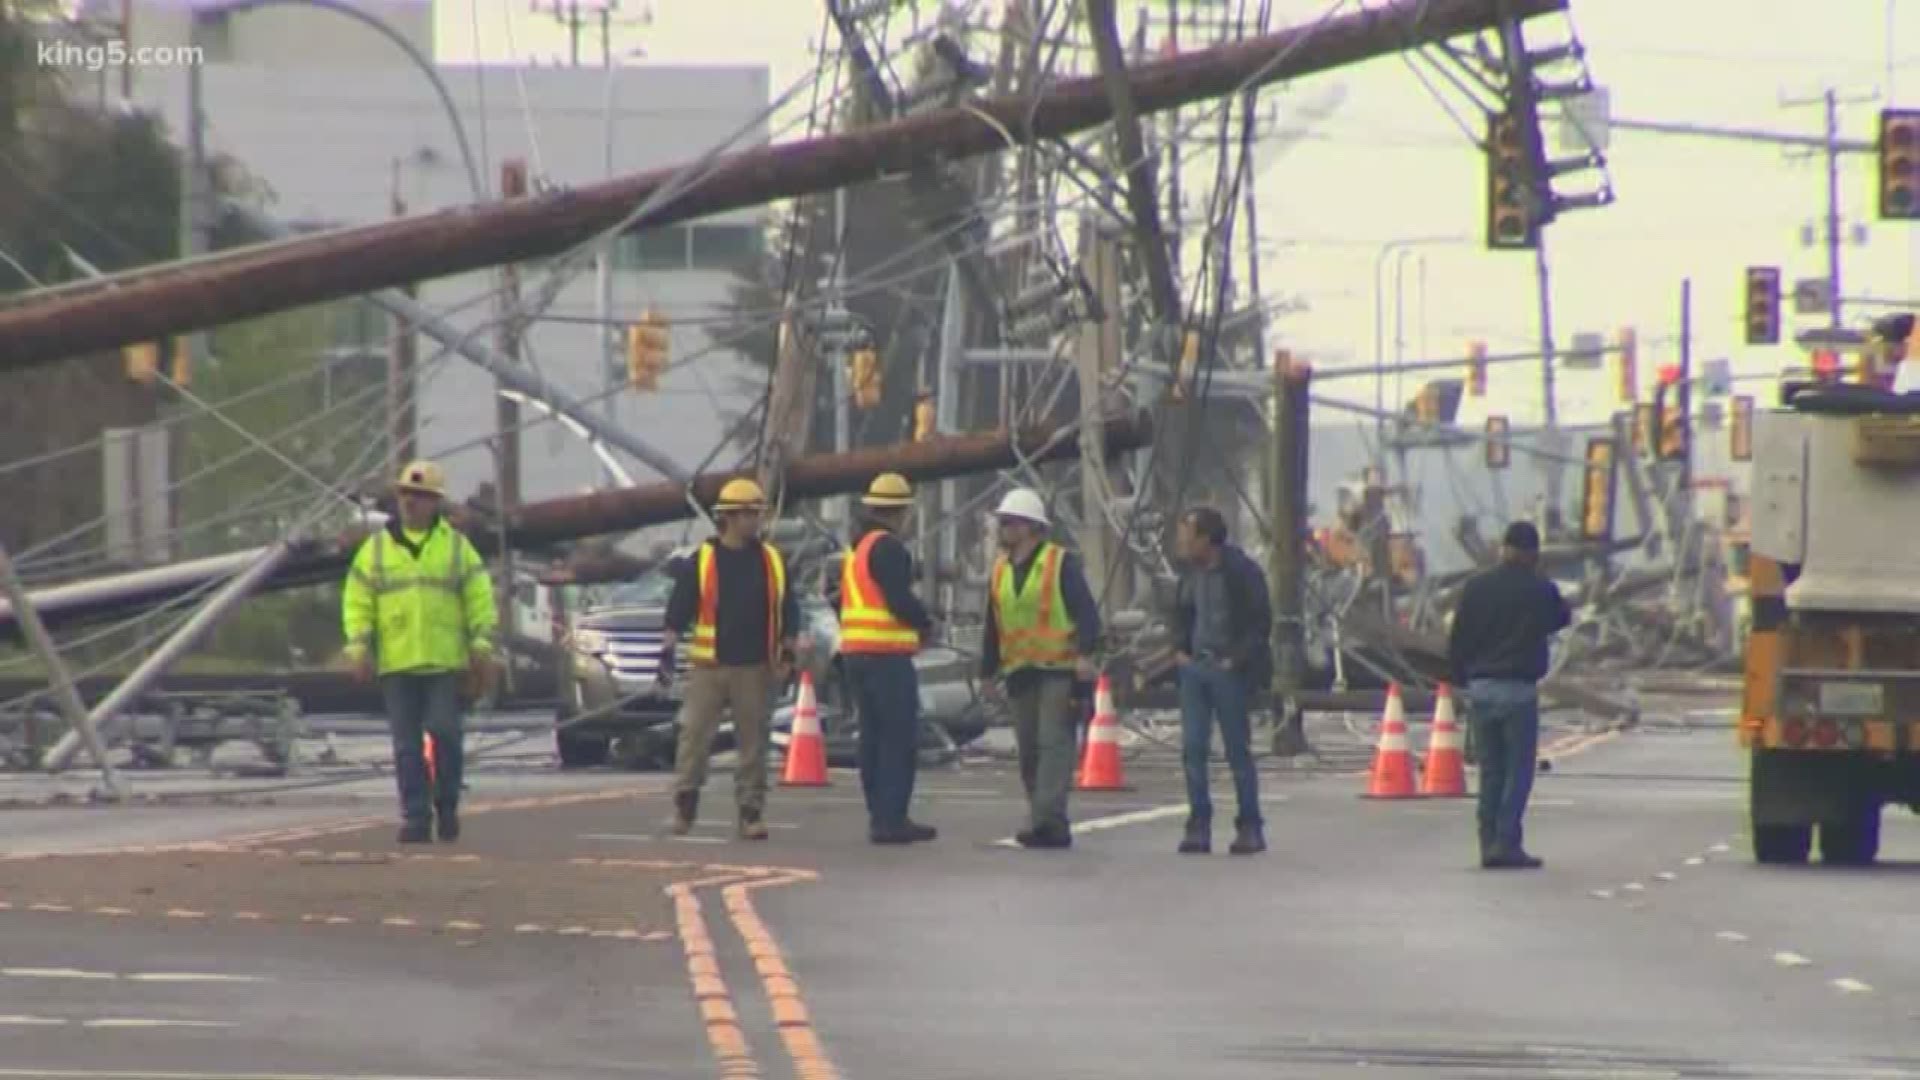 We are getting a look at the moment a power pole came down on a car, trapping two people inside. The release of the video comes as Seattle City Light is preparing to announce which group will investigate what happened and why. KING 5's Micahel Crowe reports.